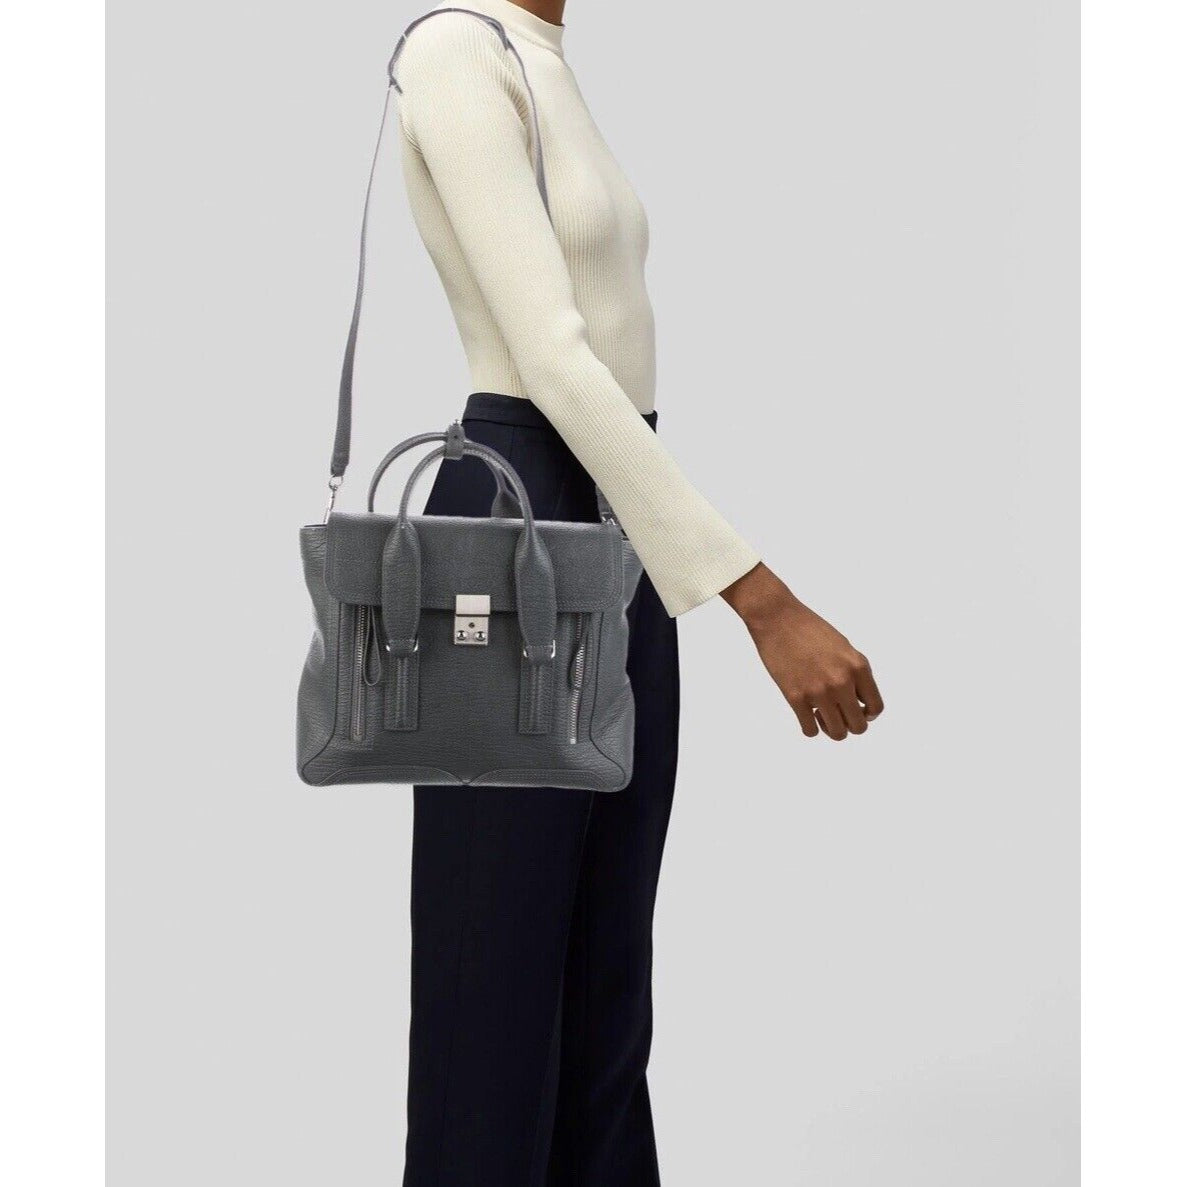 3.1 Phillip Lim Leather Pashli Medium Handbag Satchel In Gray Hanging on the Shoulder of a Woman on a White Background